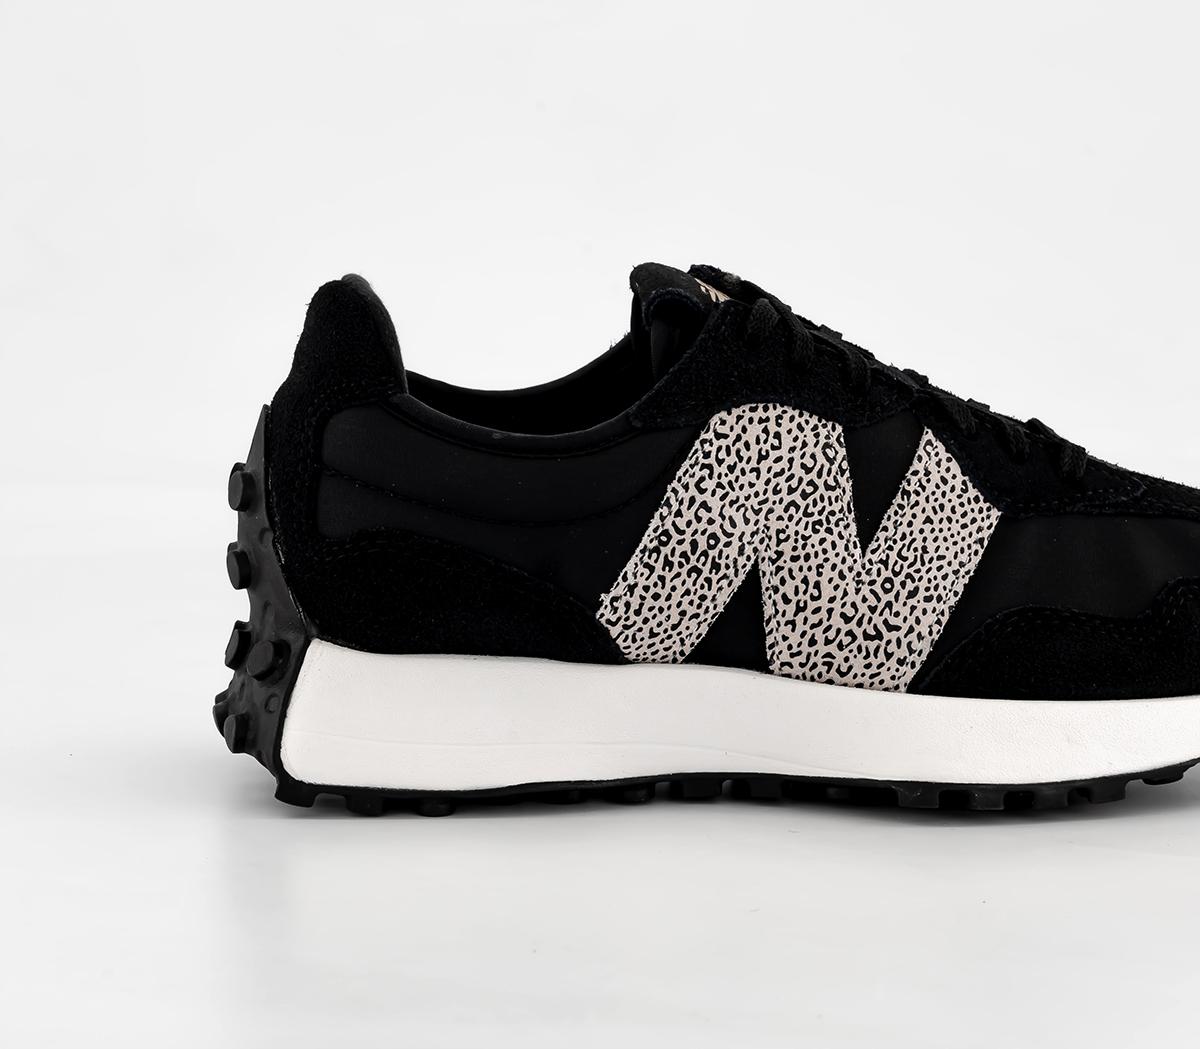 New Balance 327 Trainers Black Leopard White - Women's Trainers